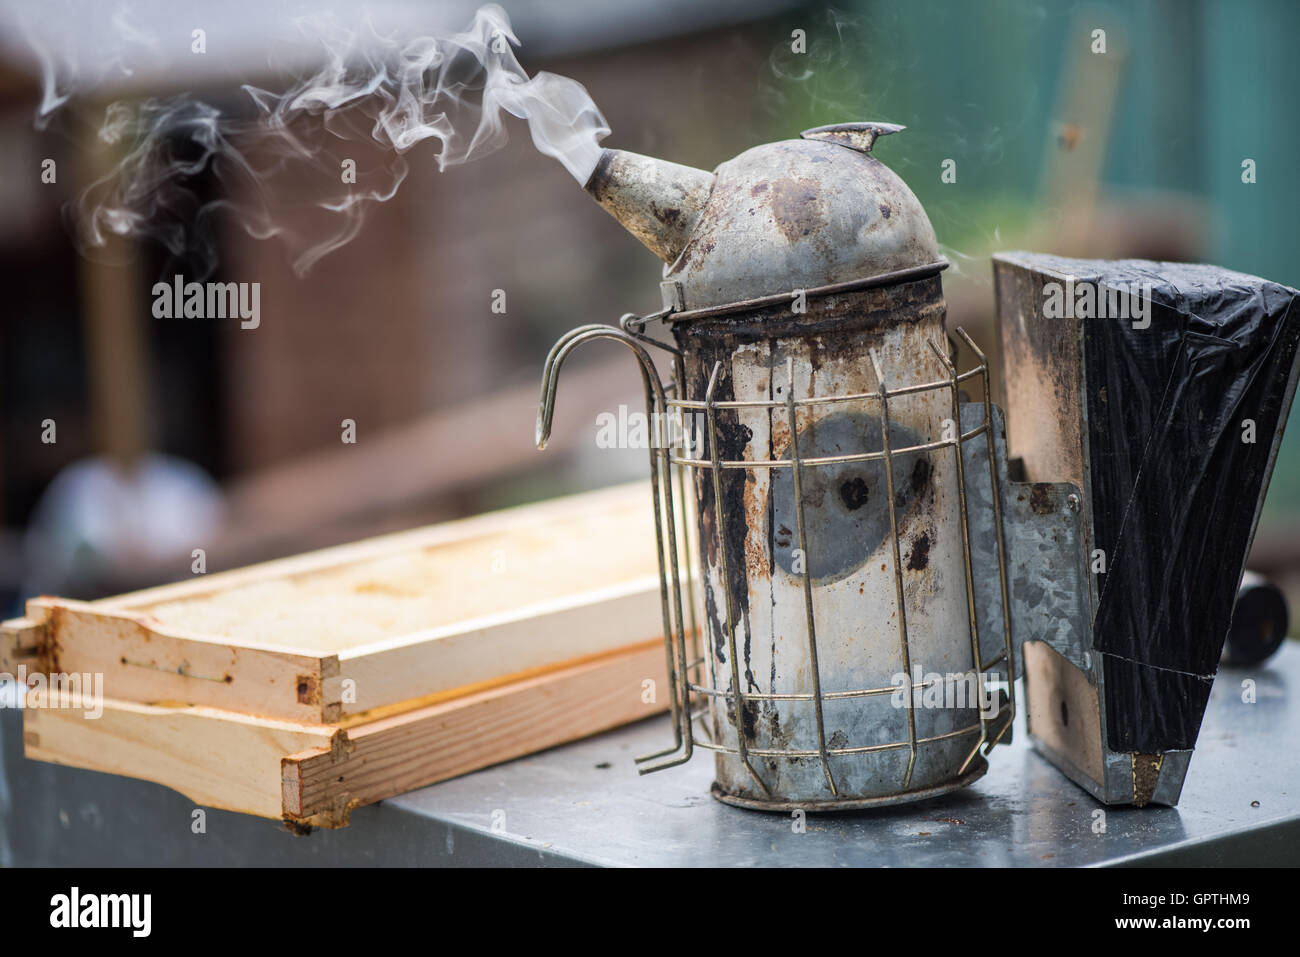 Smoker used for calming bees at apiary Stock Photo